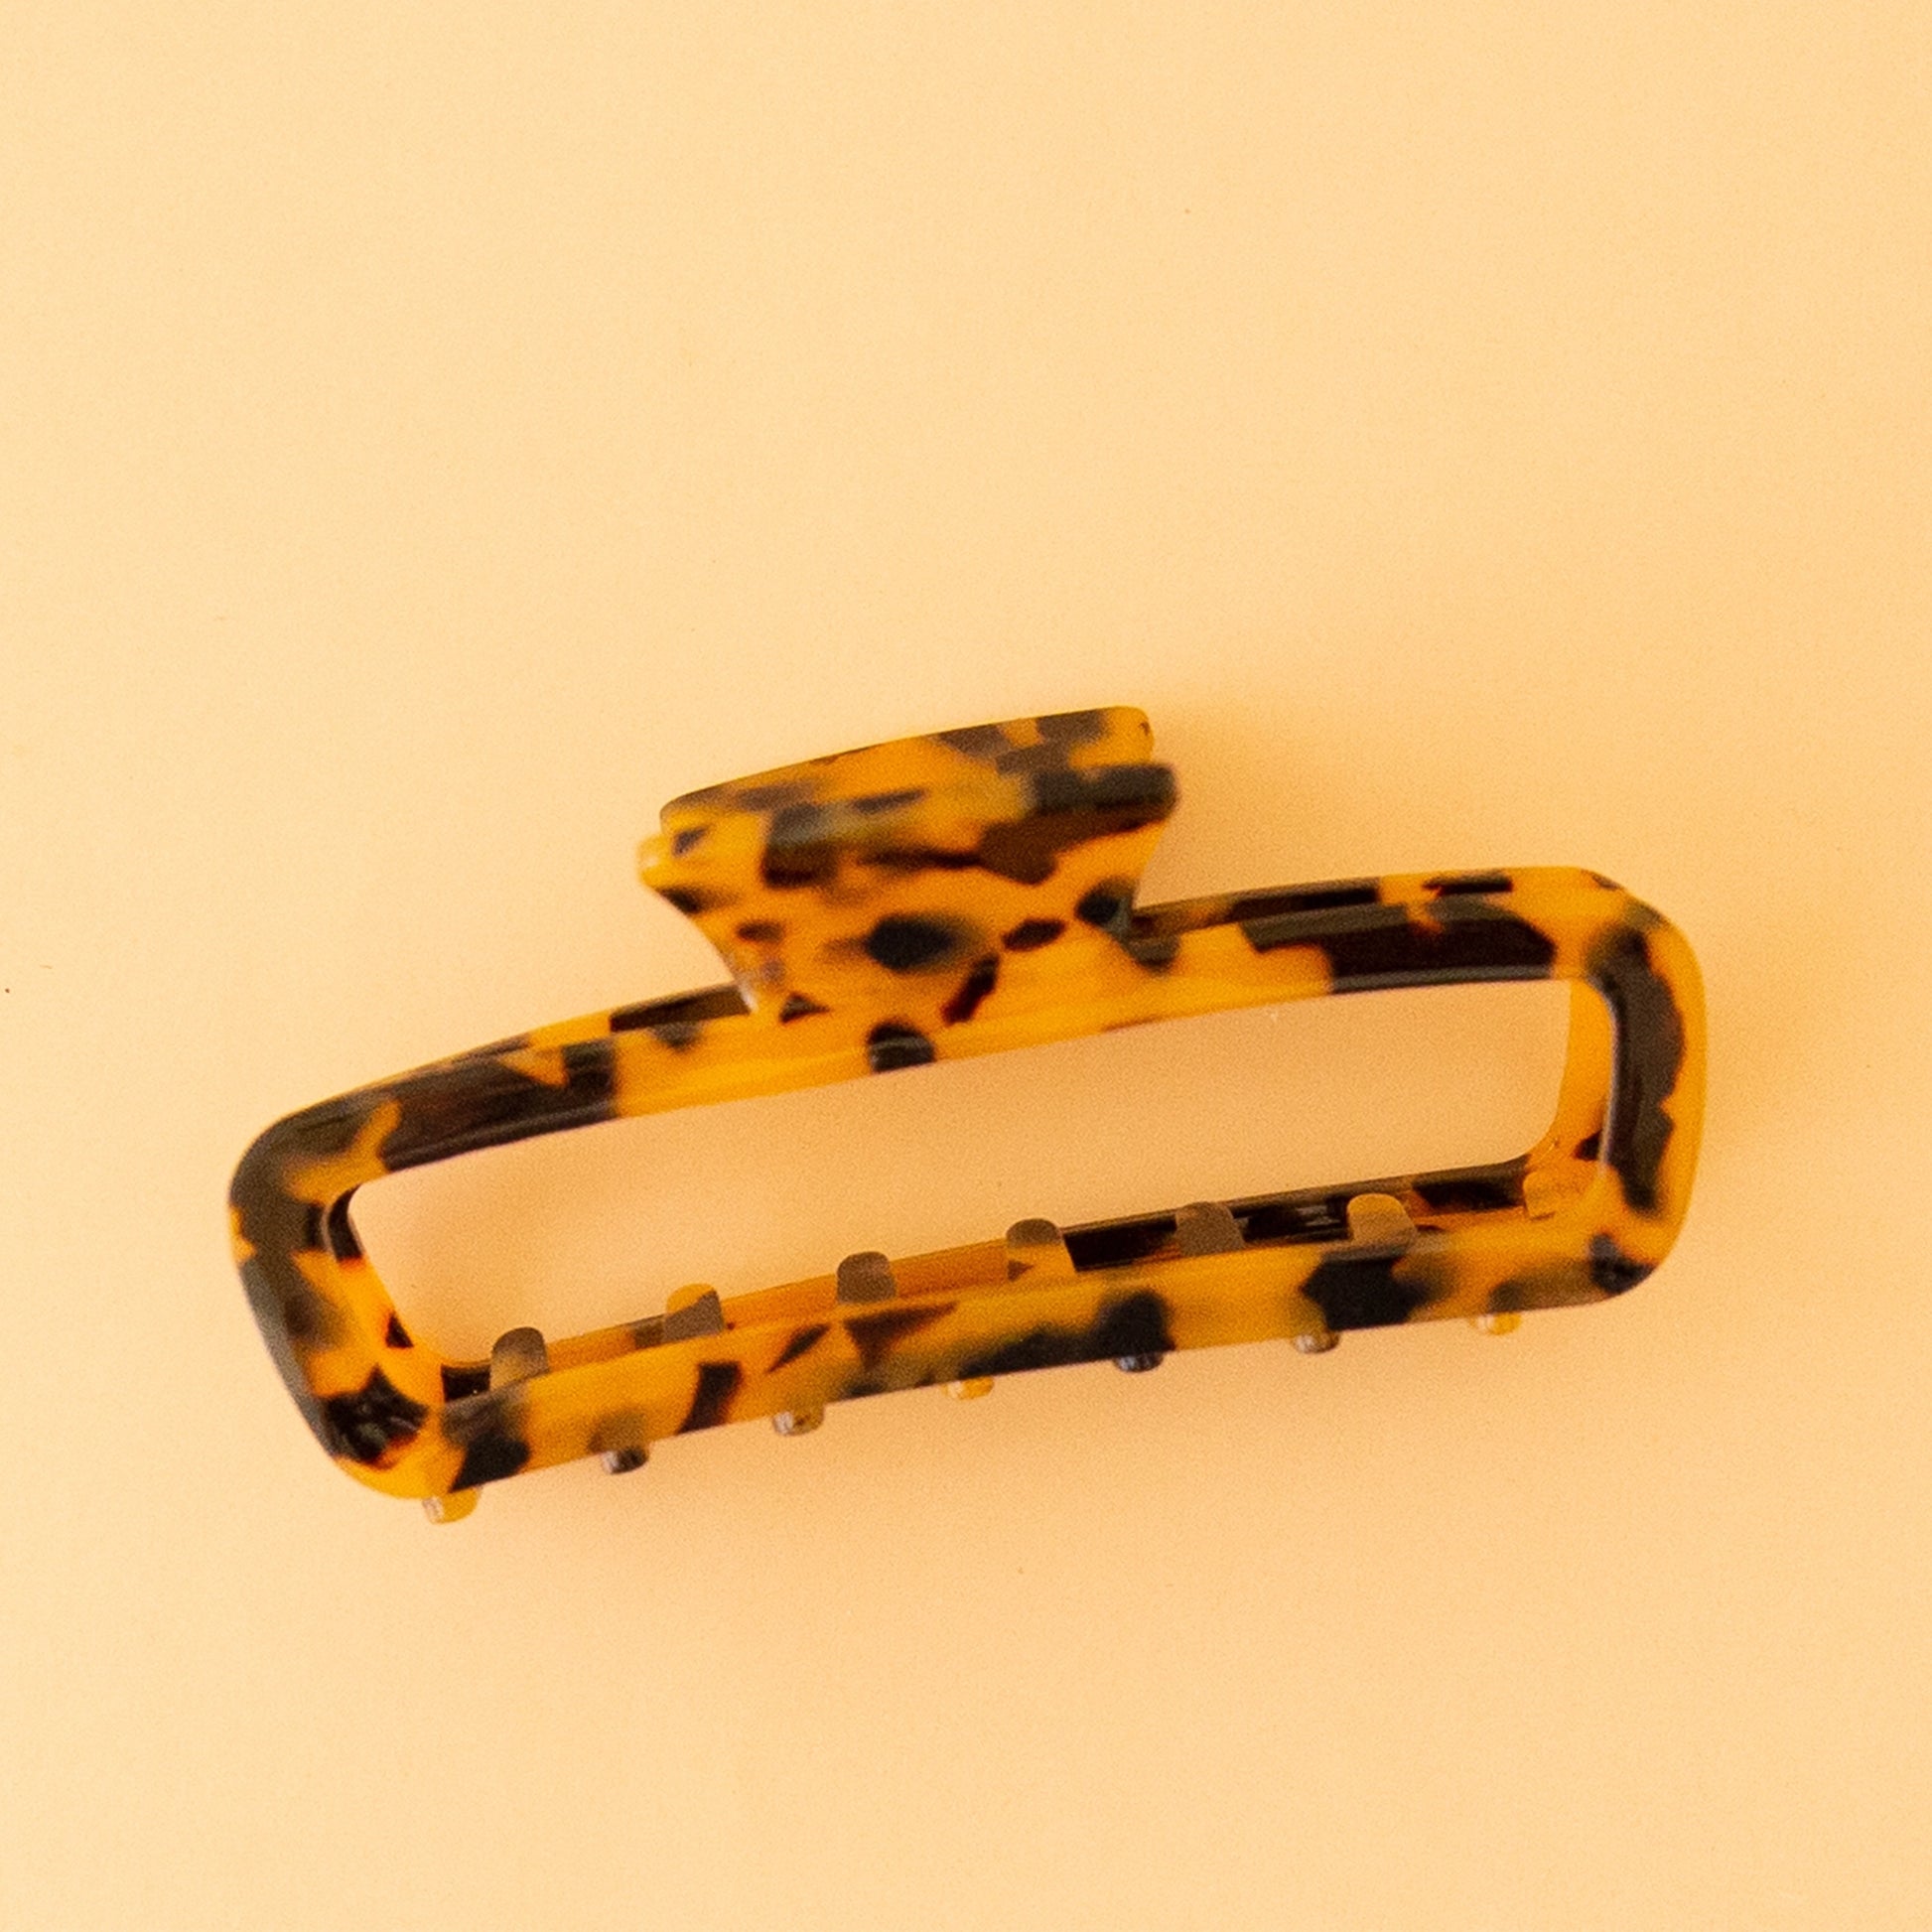 On a peachy background is a rounded rectangular shaped hair claw clip in the shade tortoise.